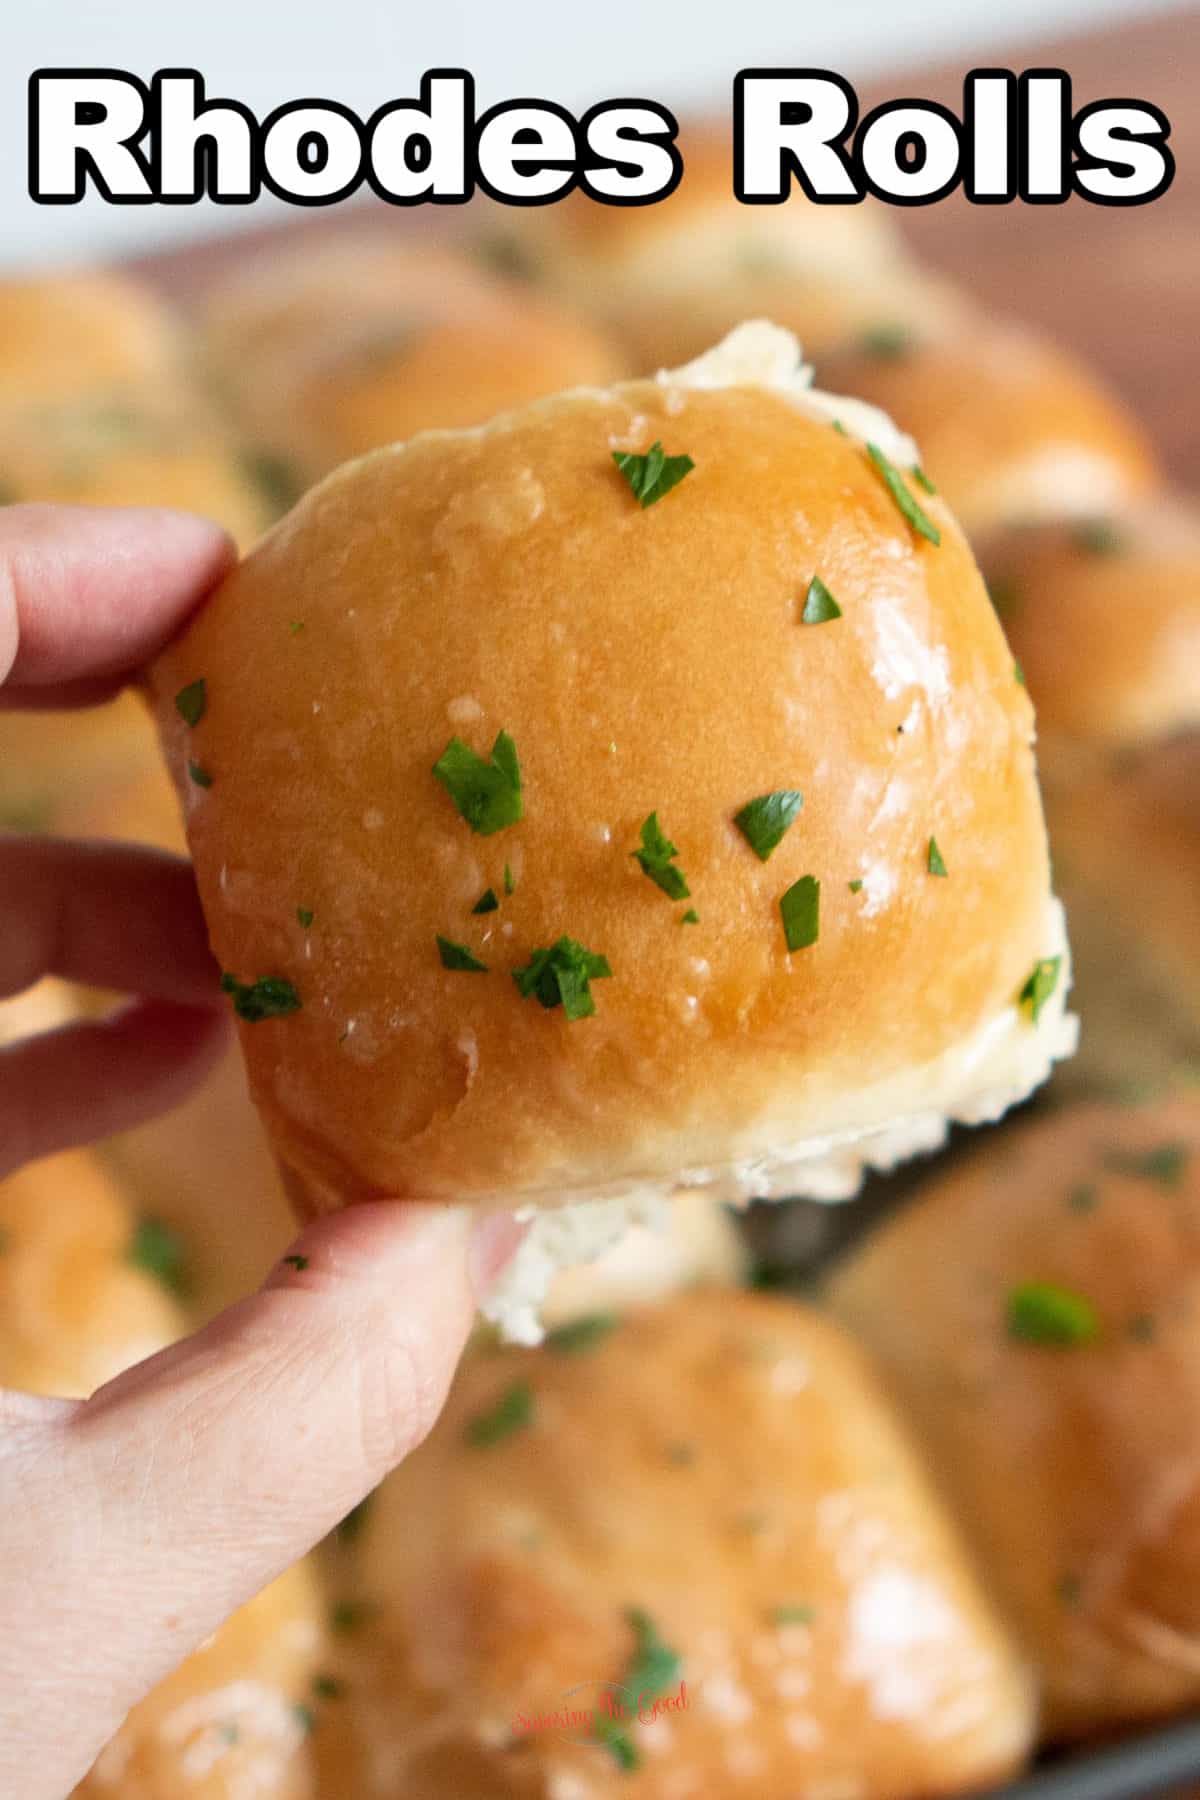 Rhodes rolls are placed on a baking sheet.